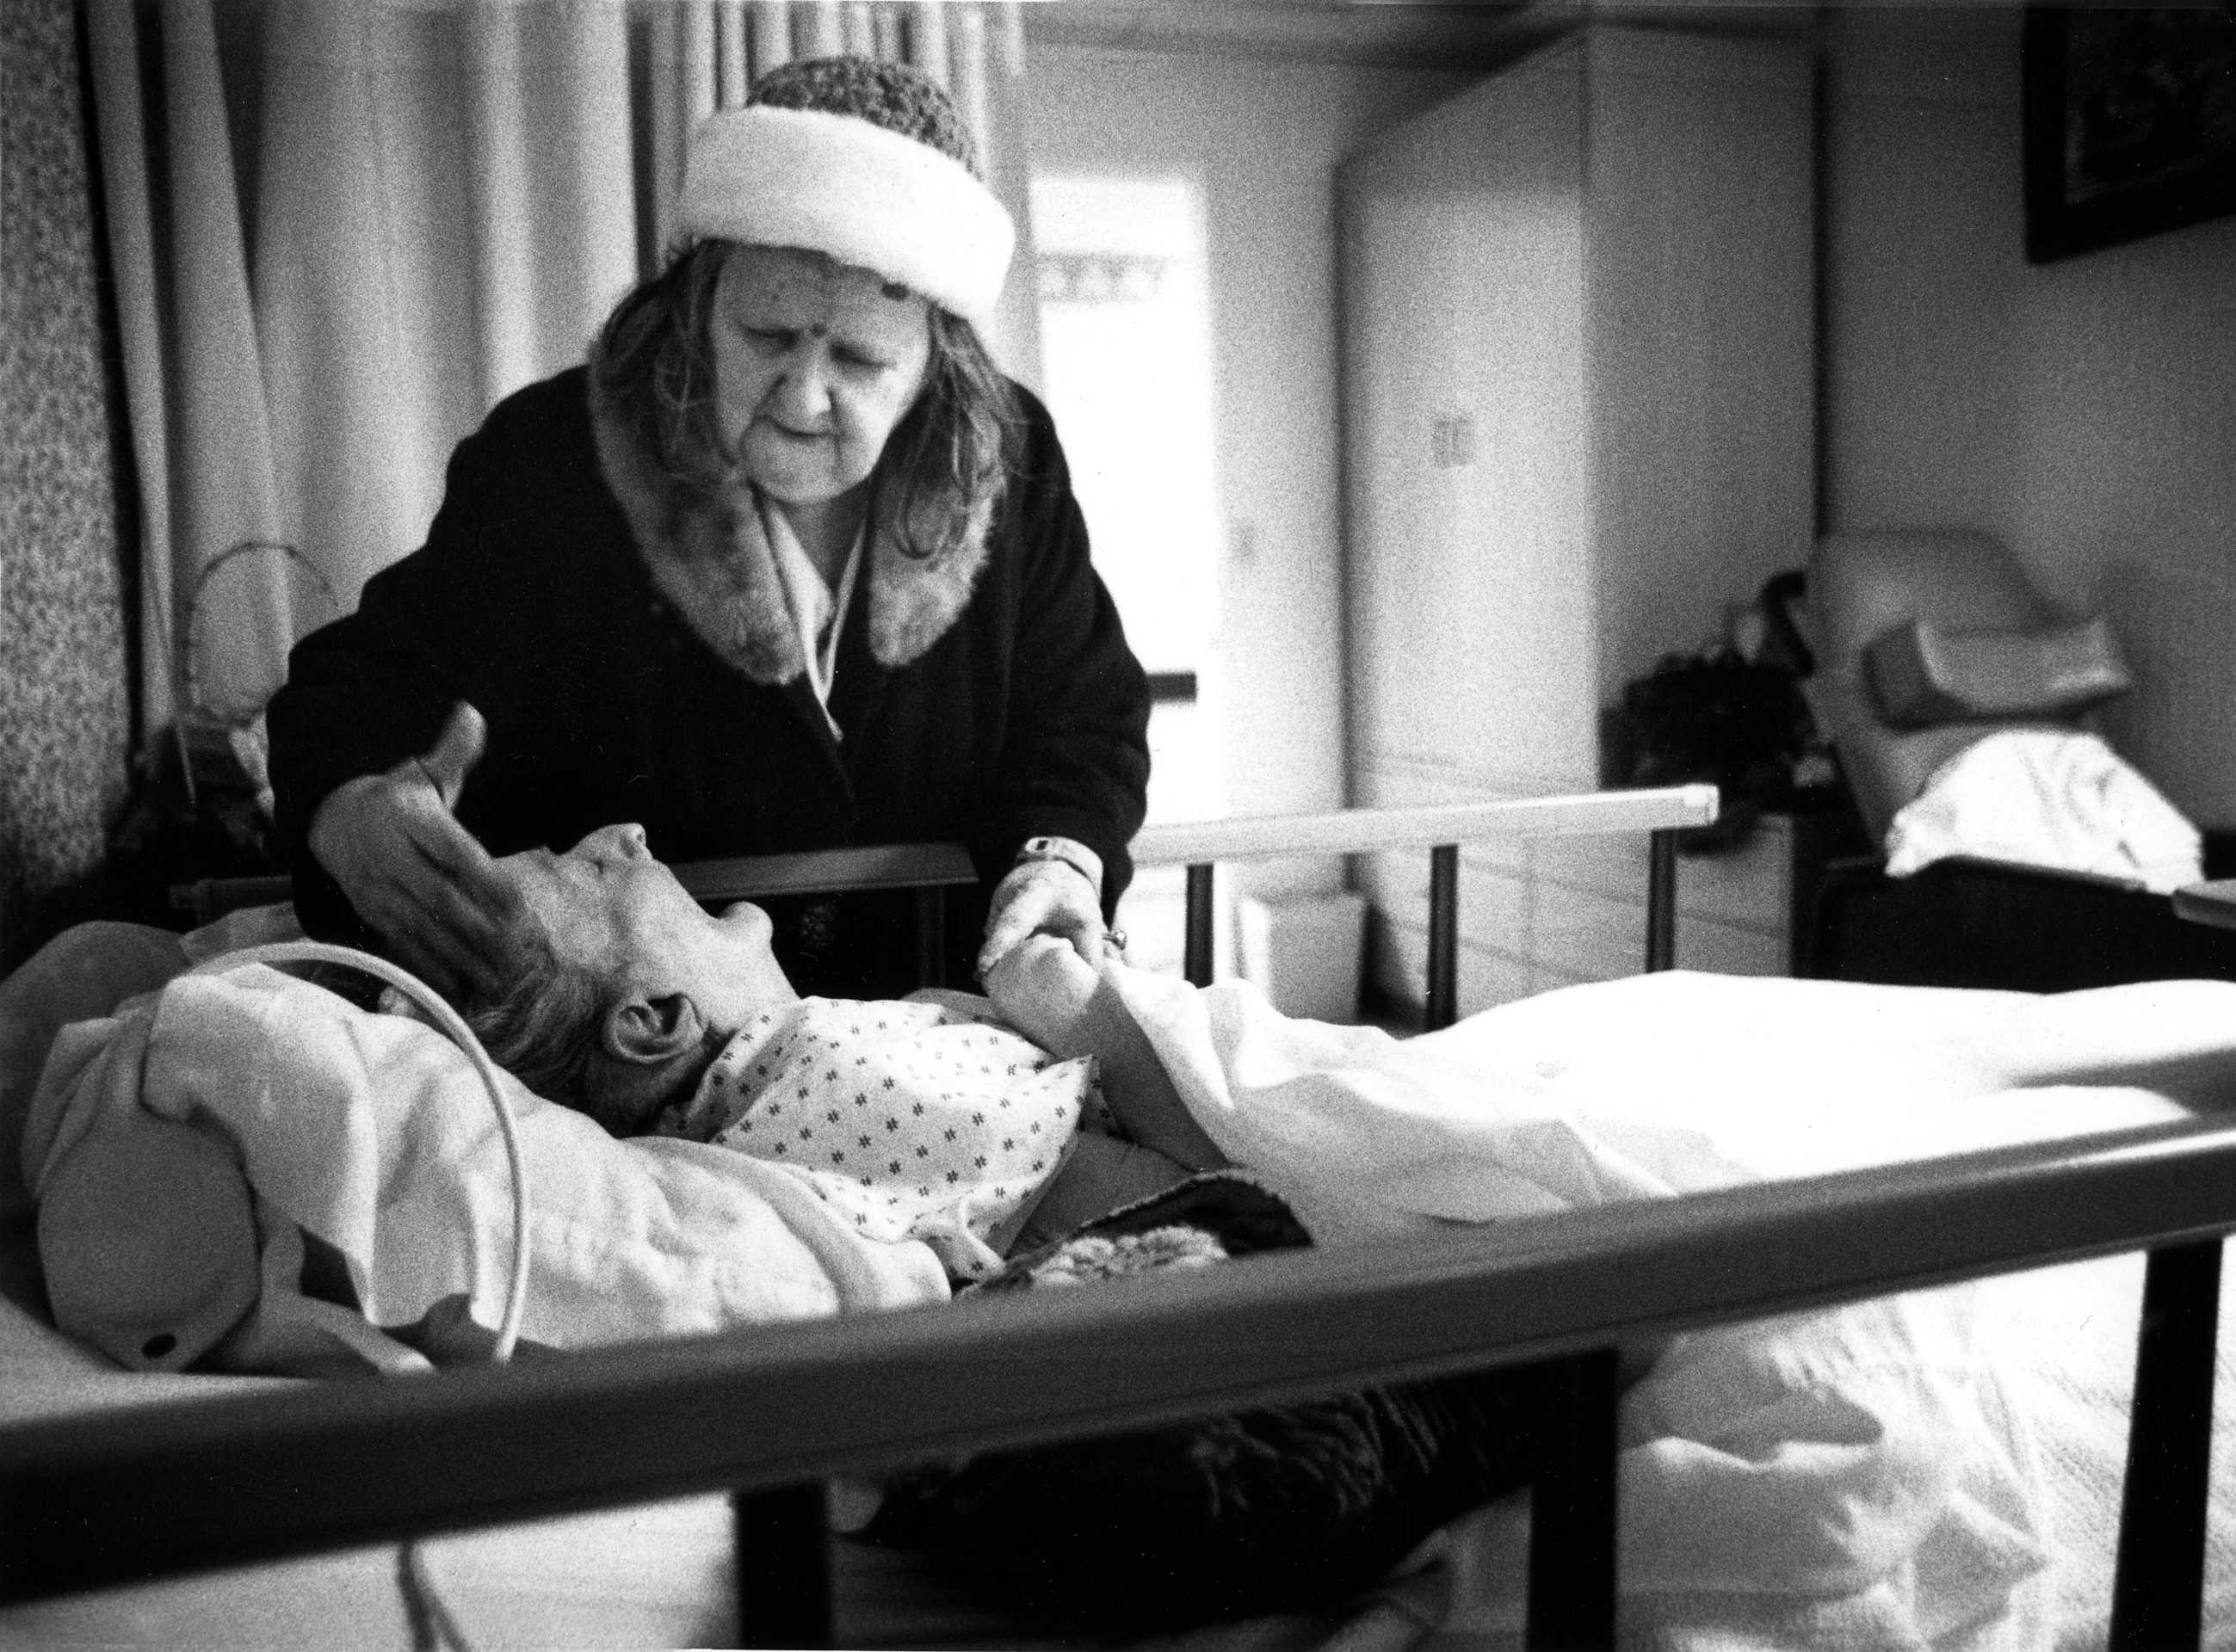 Rose, 80, visits her twin sister Mary at a nursing home. The two were inseparable their entire life until Mary become ill. This was part of a Valentine's Day story about the different ways we love. 1994.